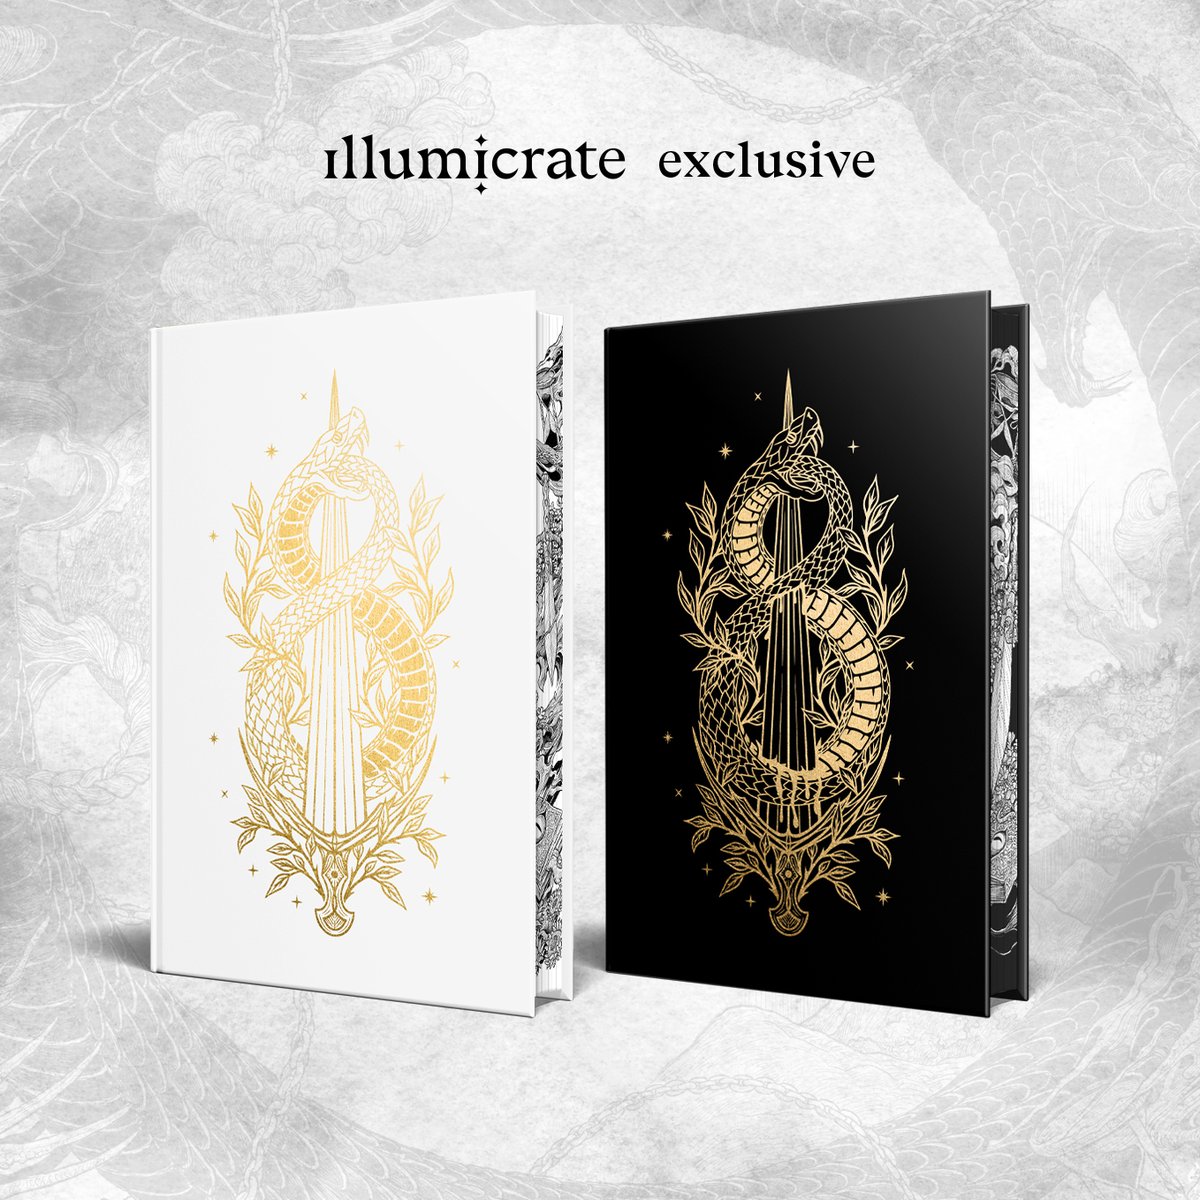 We’re thrilled to announce, in collaboration with H.E. Edgmon (@heedgmon) and Daphne Press (@daphne_press), our Illumicrate Exclusive: Ouroboros Duology set!